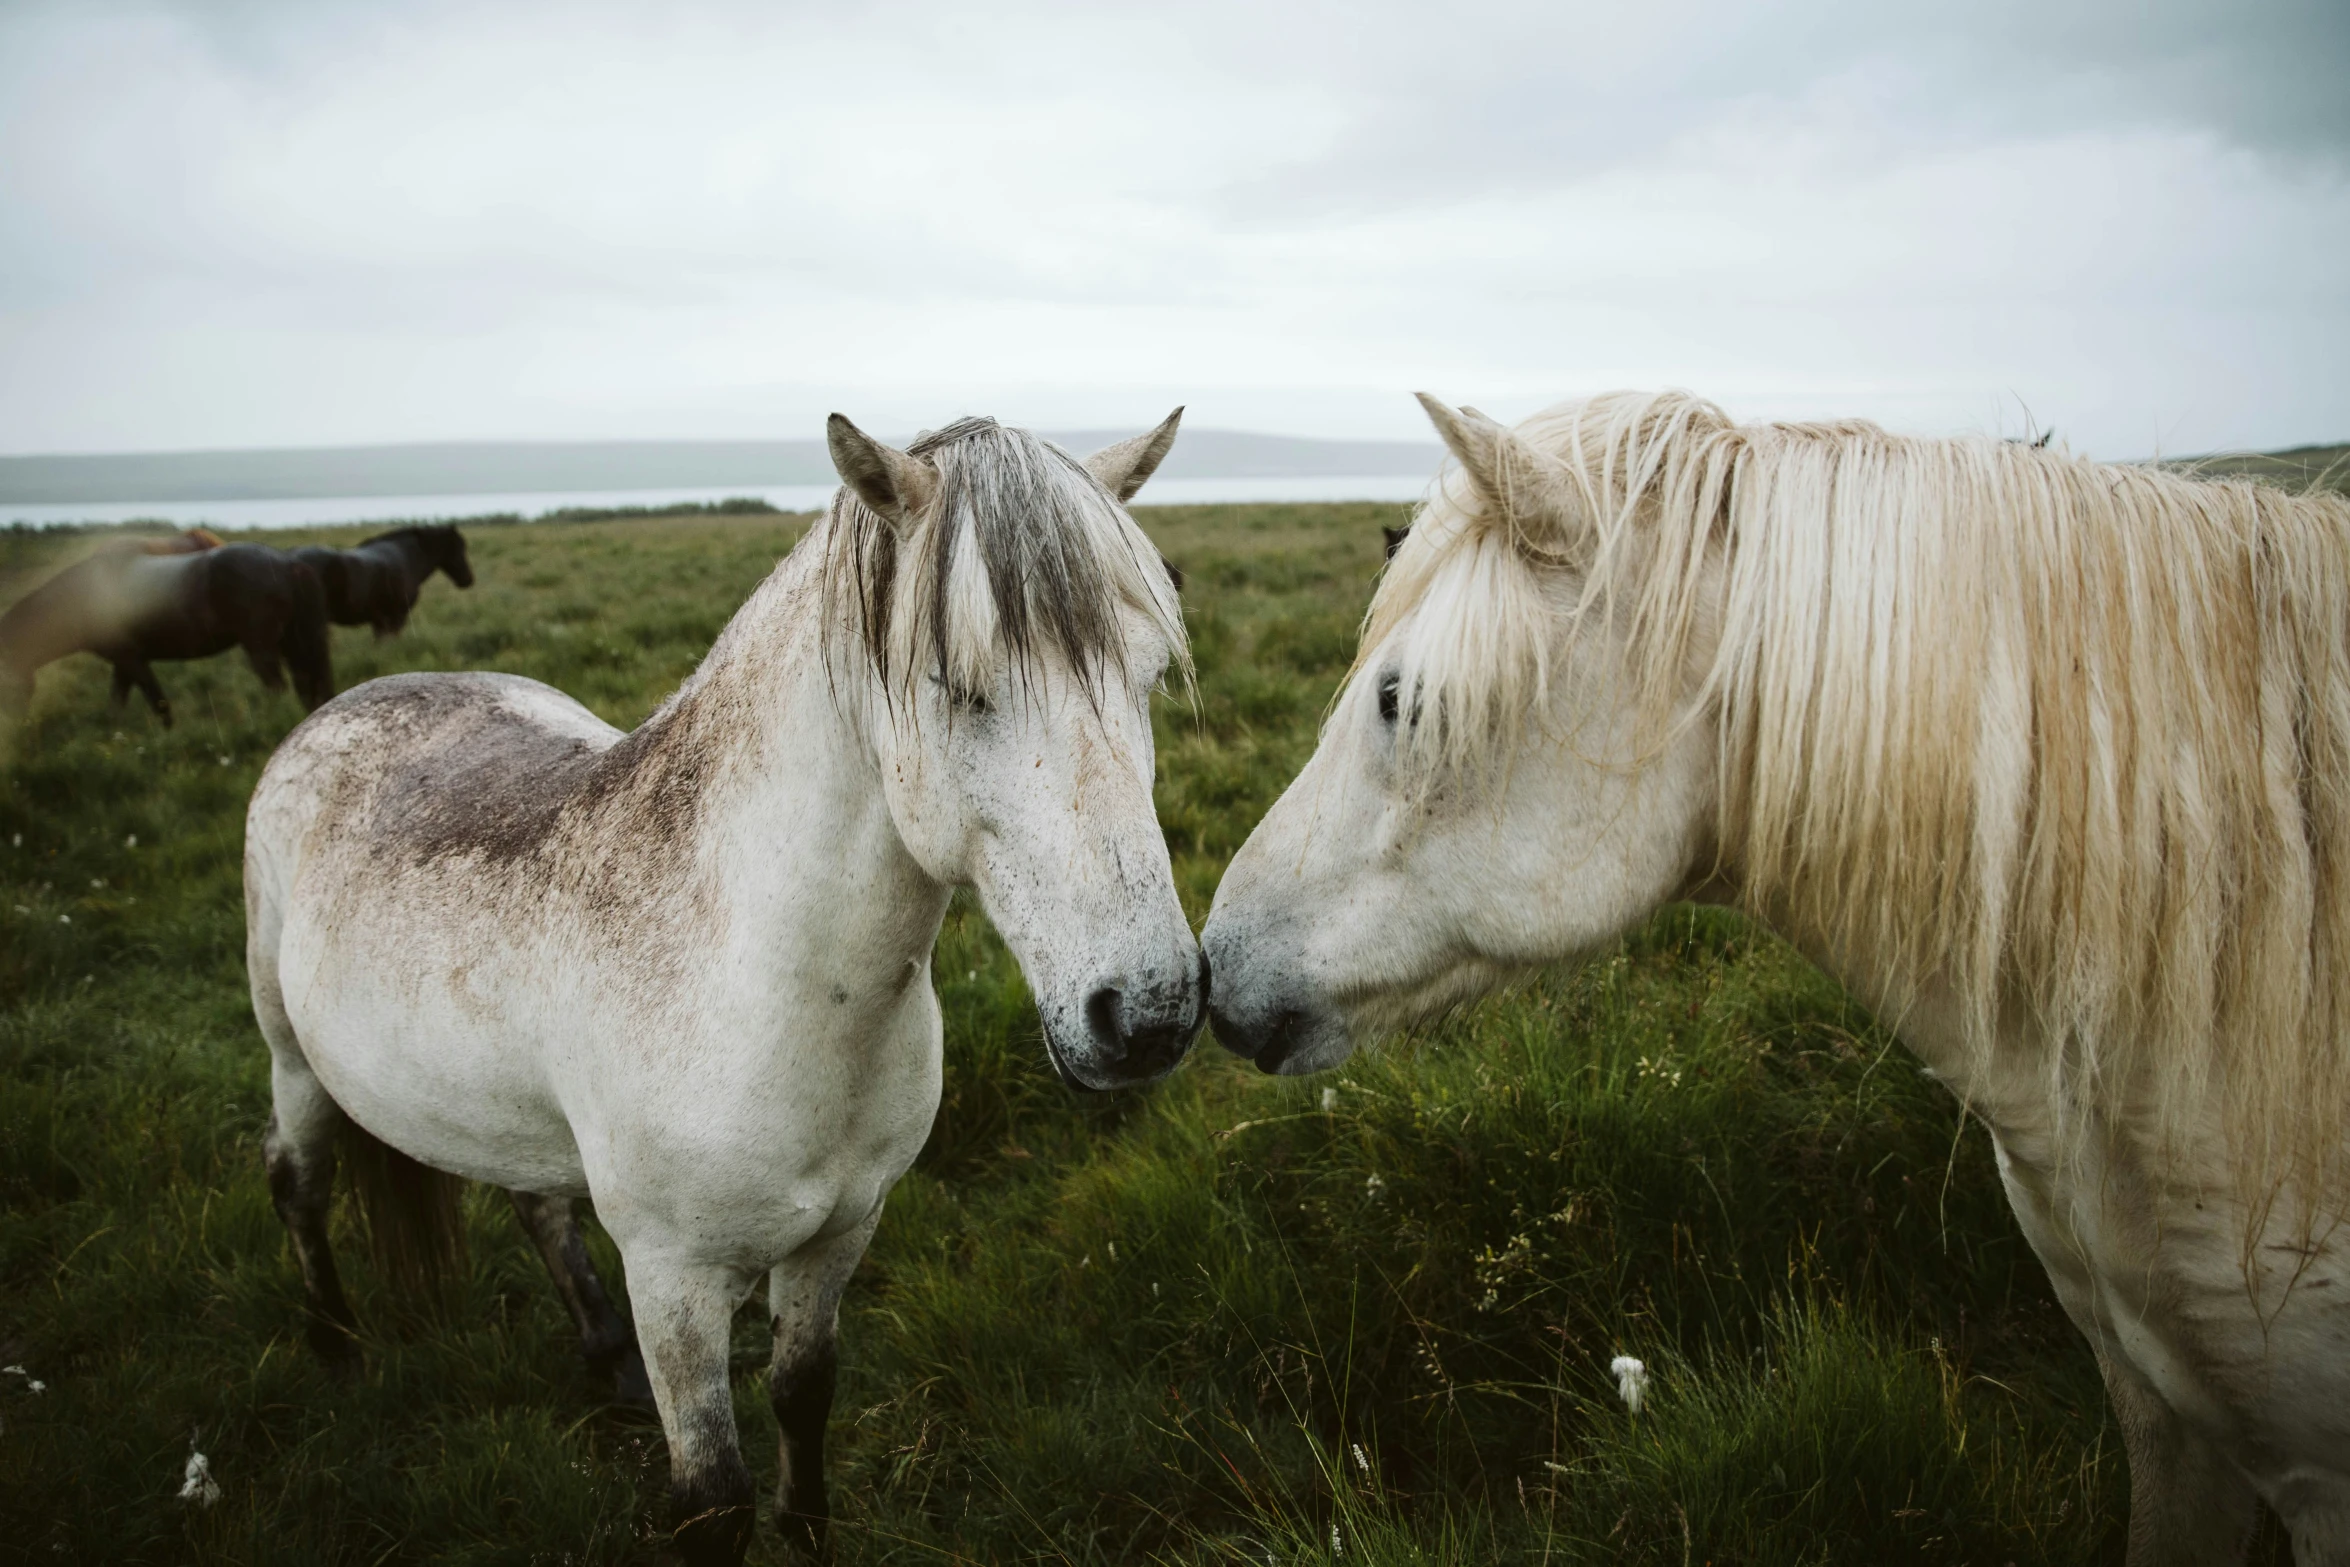 the two white horses are standing close together